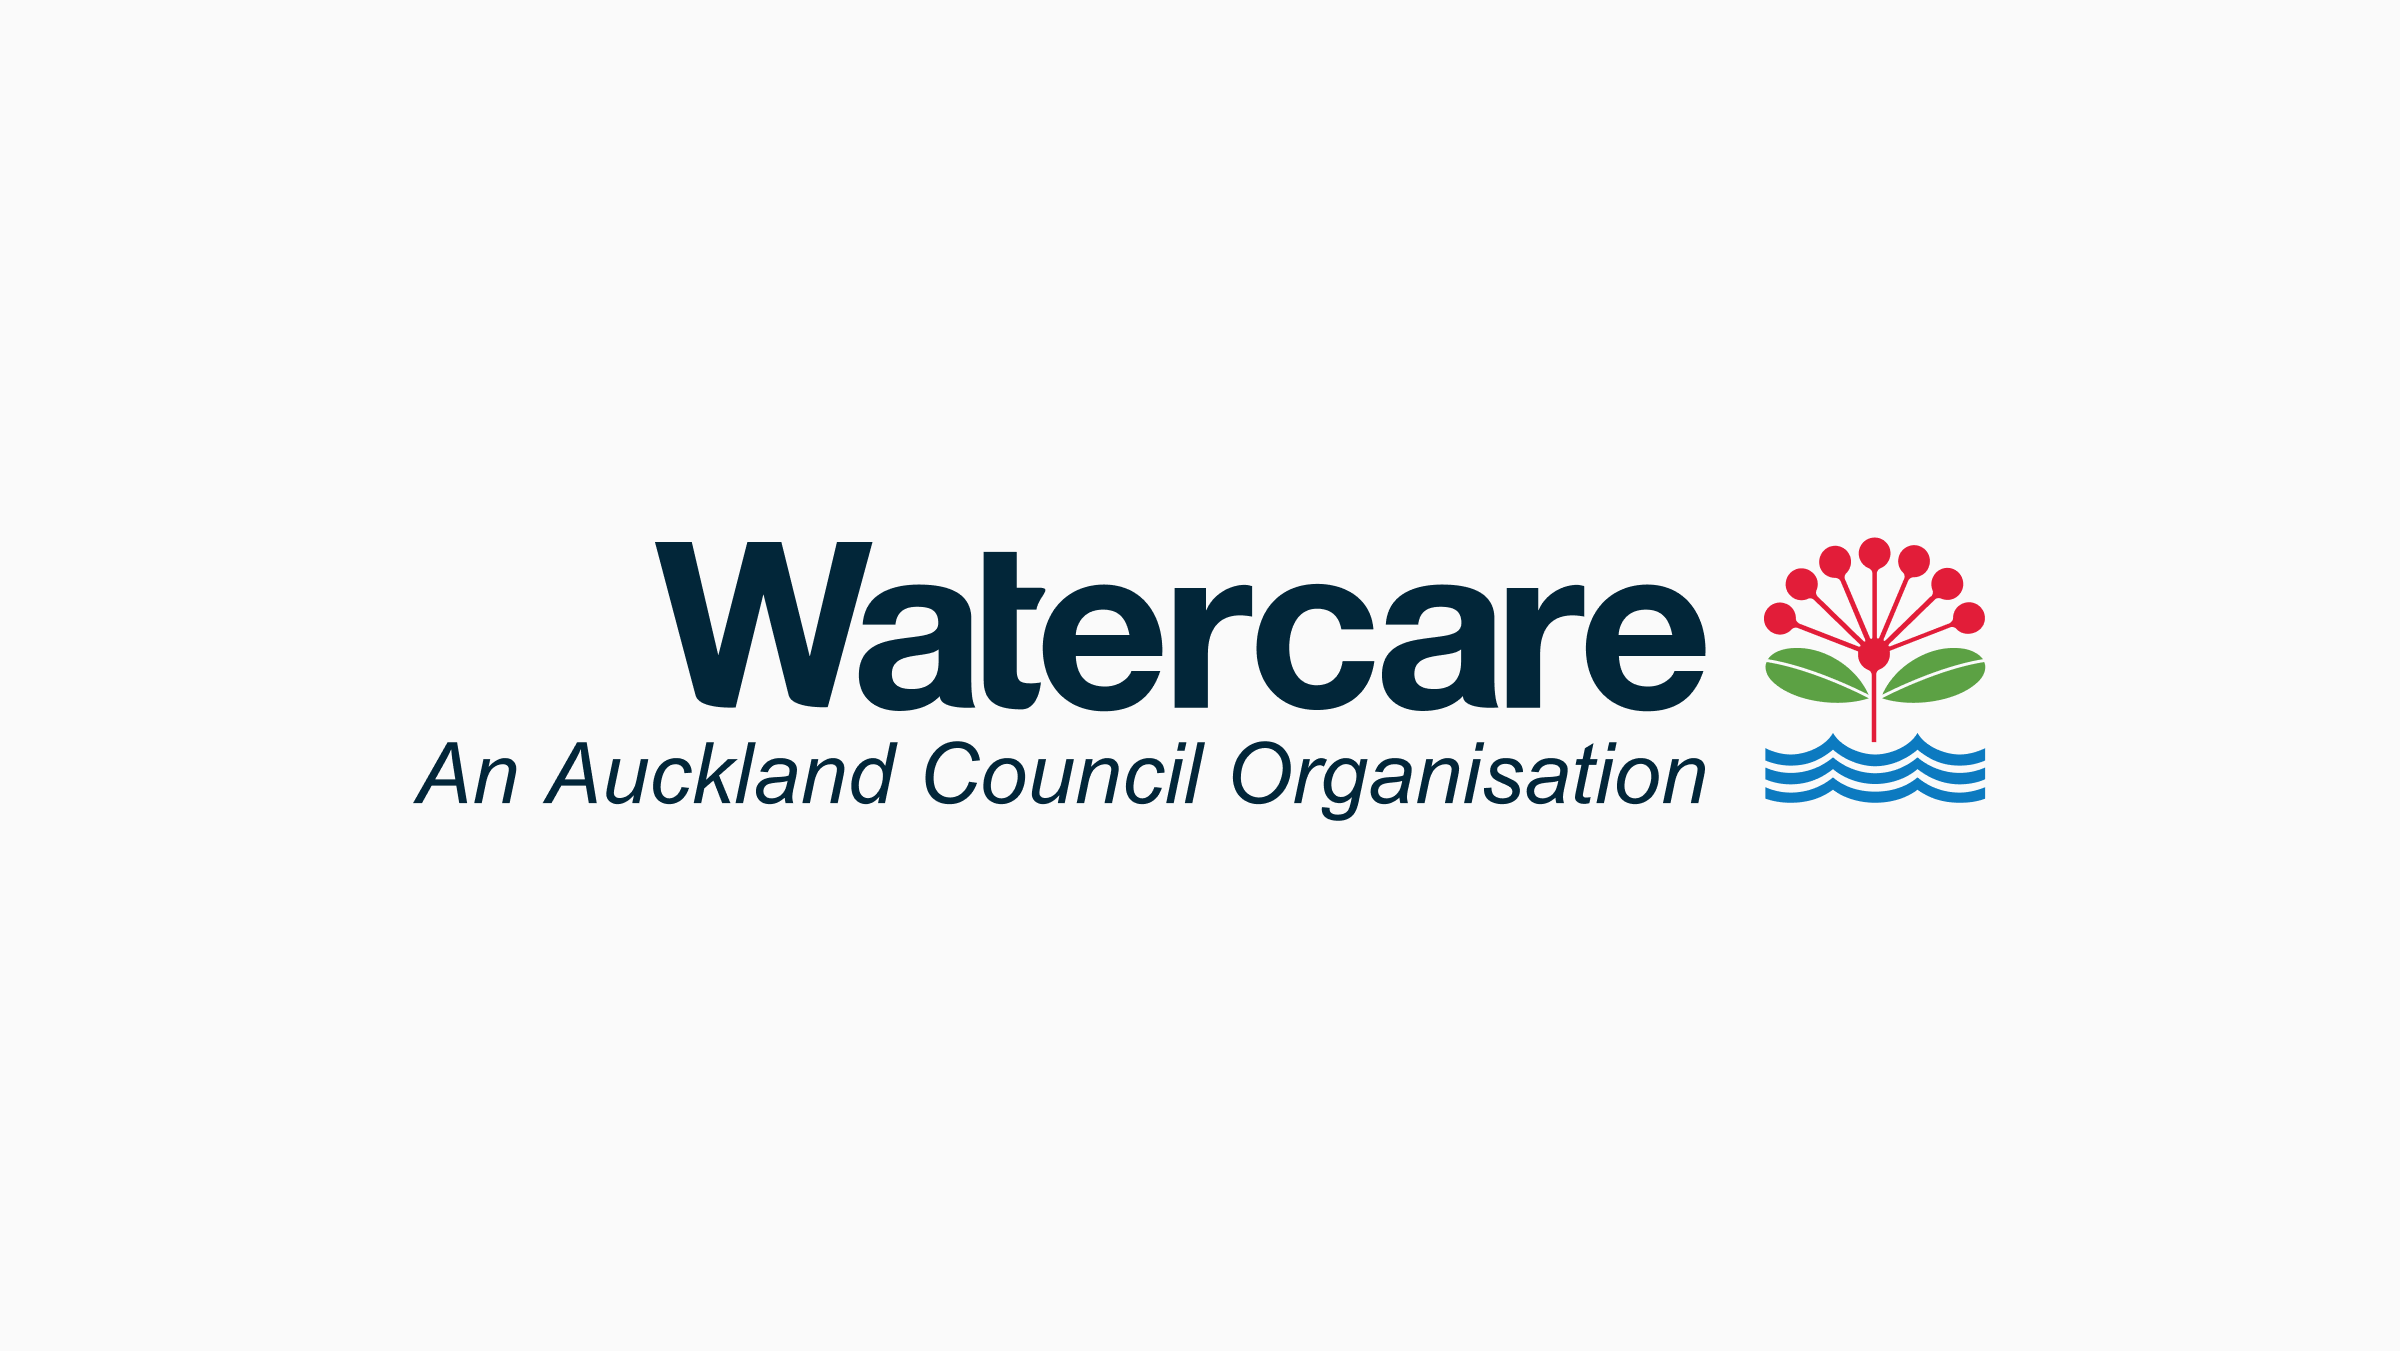 The Watercare logo